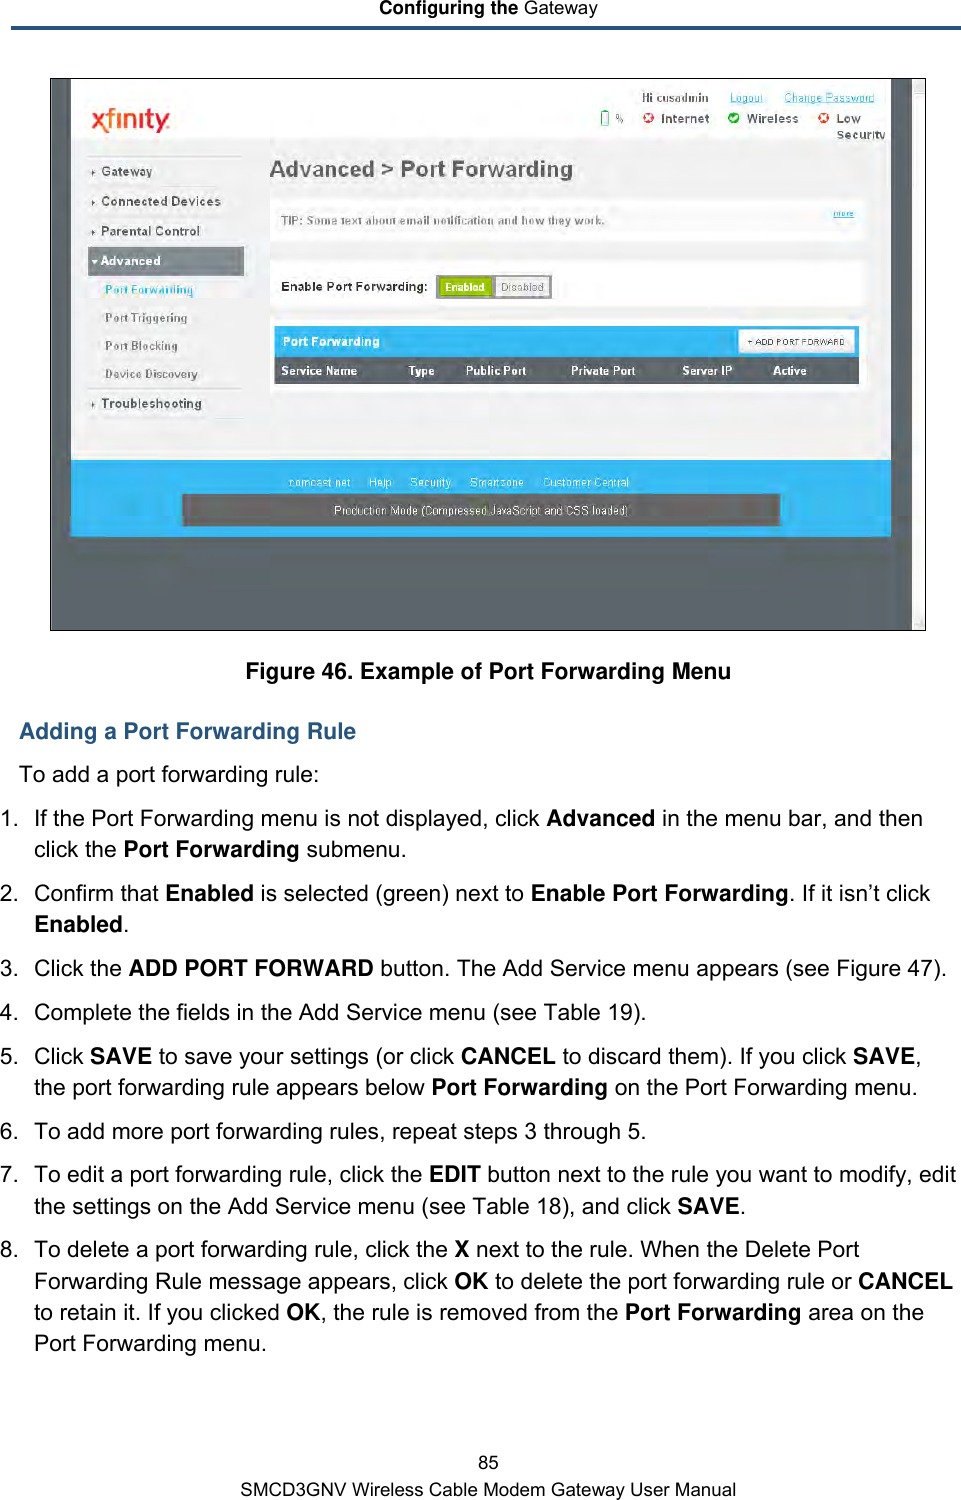 Configuring the Gateway 85 SMCD3GNV Wireless Cable Modem Gateway User Manual  Figure 46. Example of Port Forwarding Menu Adding a Port Forwarding Rule To add a port forwarding rule: 1. If the Port Forwarding menu is not displayed, click Advanced in the menu bar, and then click the Port Forwarding submenu. 2. Confirm that Enabled is selected (green) next to Enable Port Forwarding. If it isn’t click Enabled. 3. Click the ADD PORT FORWARD button. The Add Service menu appears (see Figure 47). 4. Complete the fields in the Add Service menu (see Table 19). 5. Click SAVE to save your settings (or click CANCEL to discard them). If you click SAVE, the port forwarding rule appears below Port Forwarding on the Port Forwarding menu. 6. To add more port forwarding rules, repeat steps 3 through 5. 7. To edit a port forwarding rule, click the EDIT button next to the rule you want to modify, edit the settings on the Add Service menu (see Table 18), and click SAVE. 8. To delete a port forwarding rule, click the X next to the rule. When the Delete Port Forwarding Rule message appears, click OK to delete the port forwarding rule or CANCEL to retain it. If you clicked OK, the rule is removed from the Port Forwarding area on the Port Forwarding menu. 